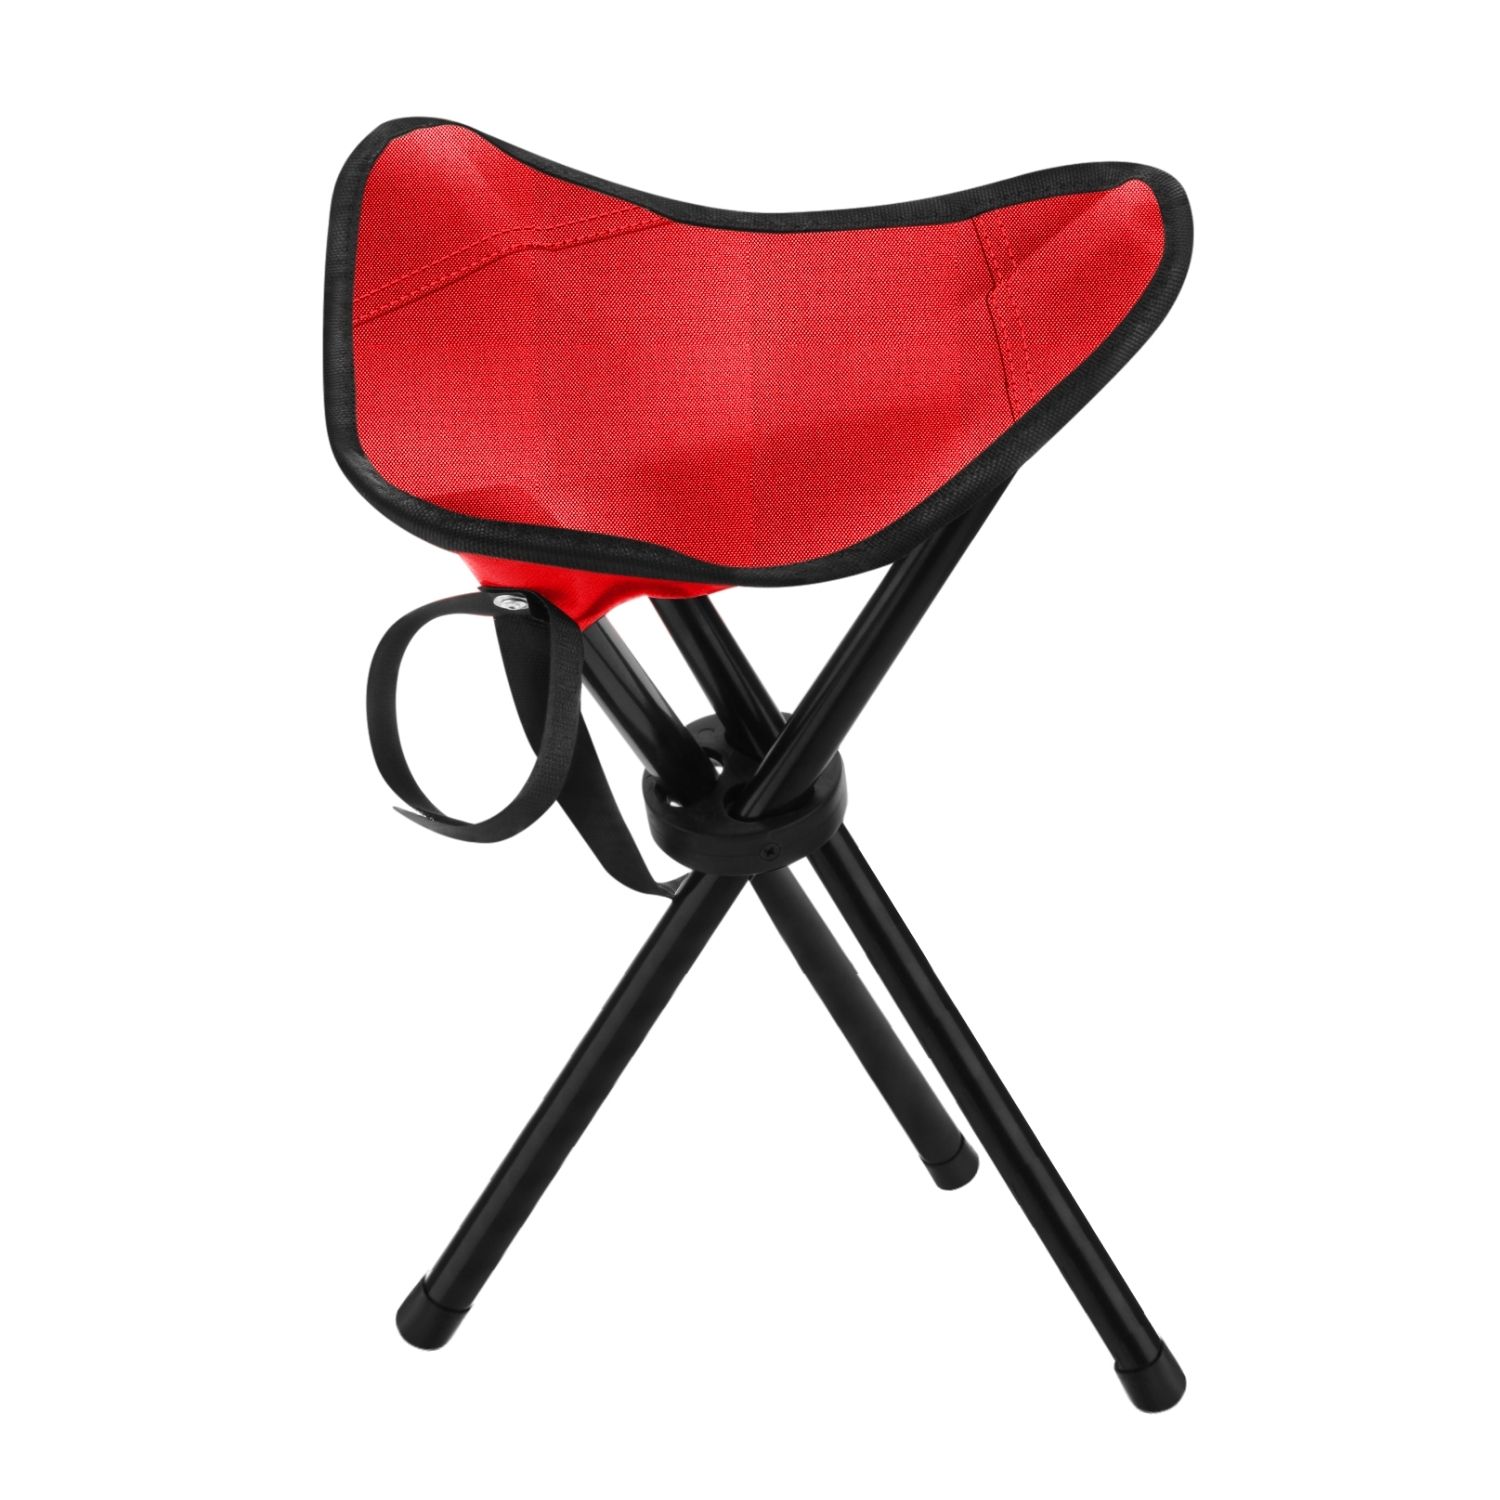 CE Compass Outdoor Folding Chair For Hiking Fishing Camping Picnic Lawn Portable Pocket With 3 Leg Stool Oxford Cloth Small Size Red